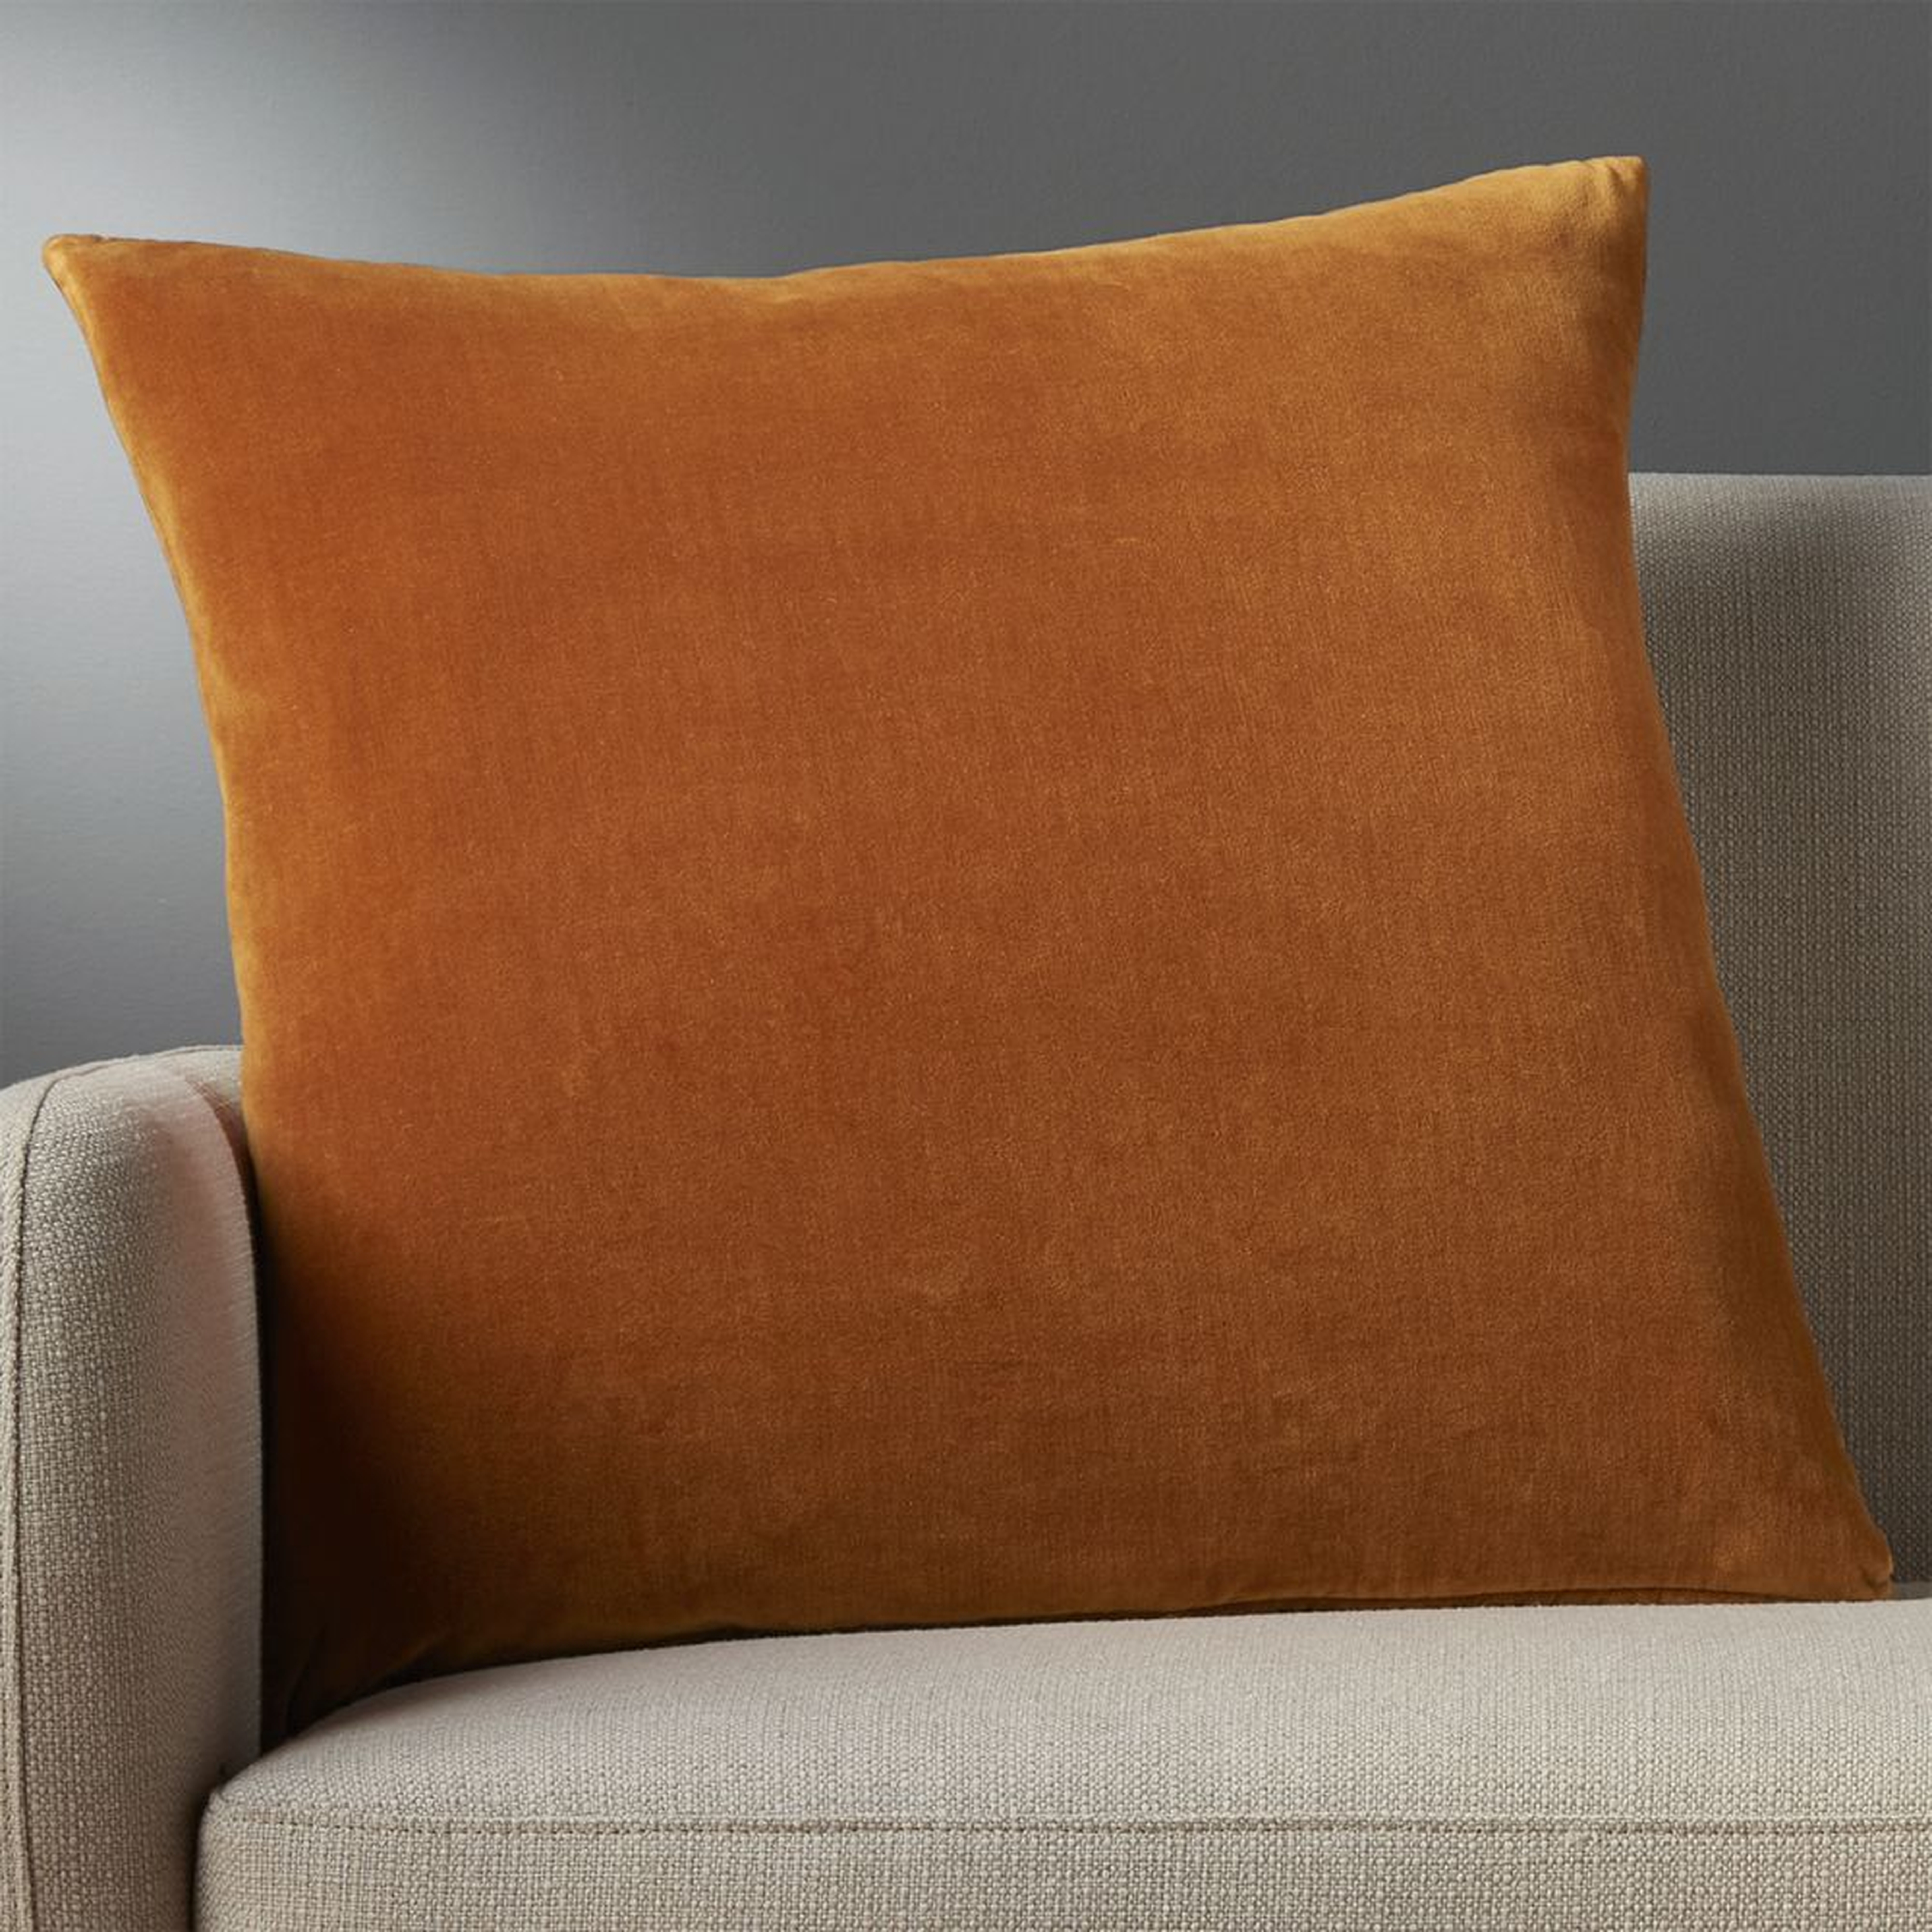 23" leisure copper pillow with down-alternative insert - CB2